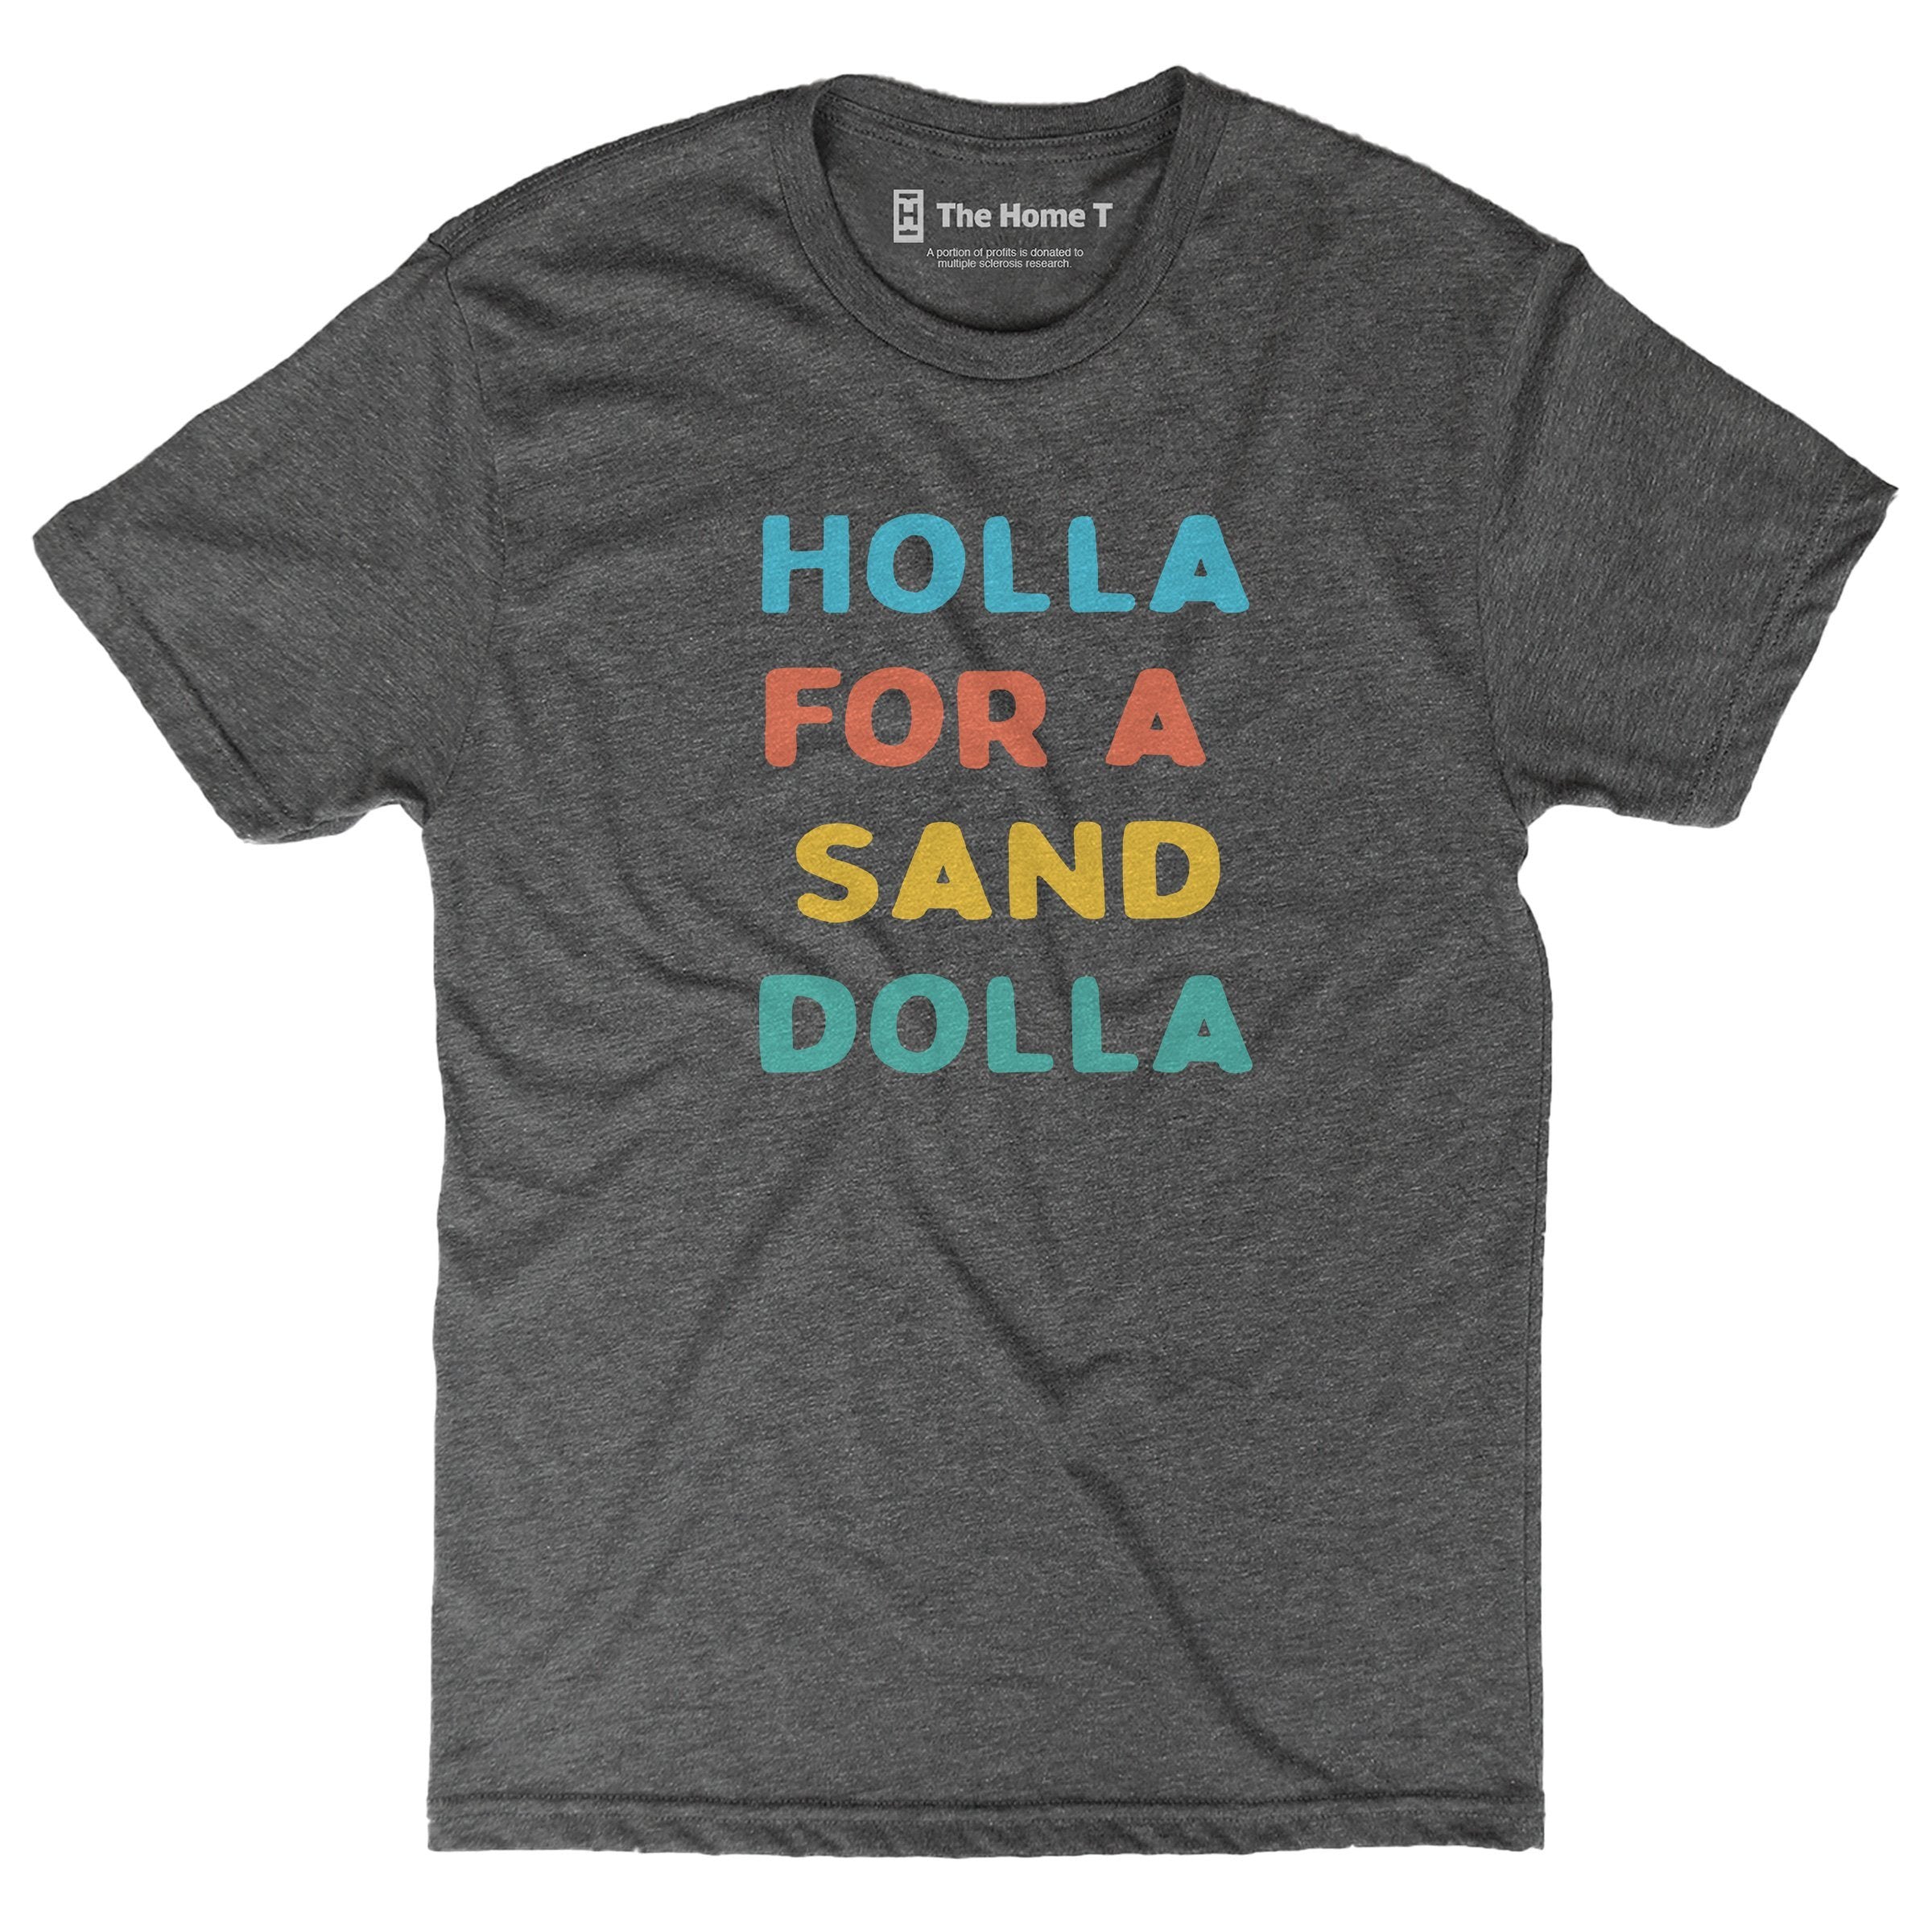 Holla for a Sand Dollar The Home T XS Crew Neck